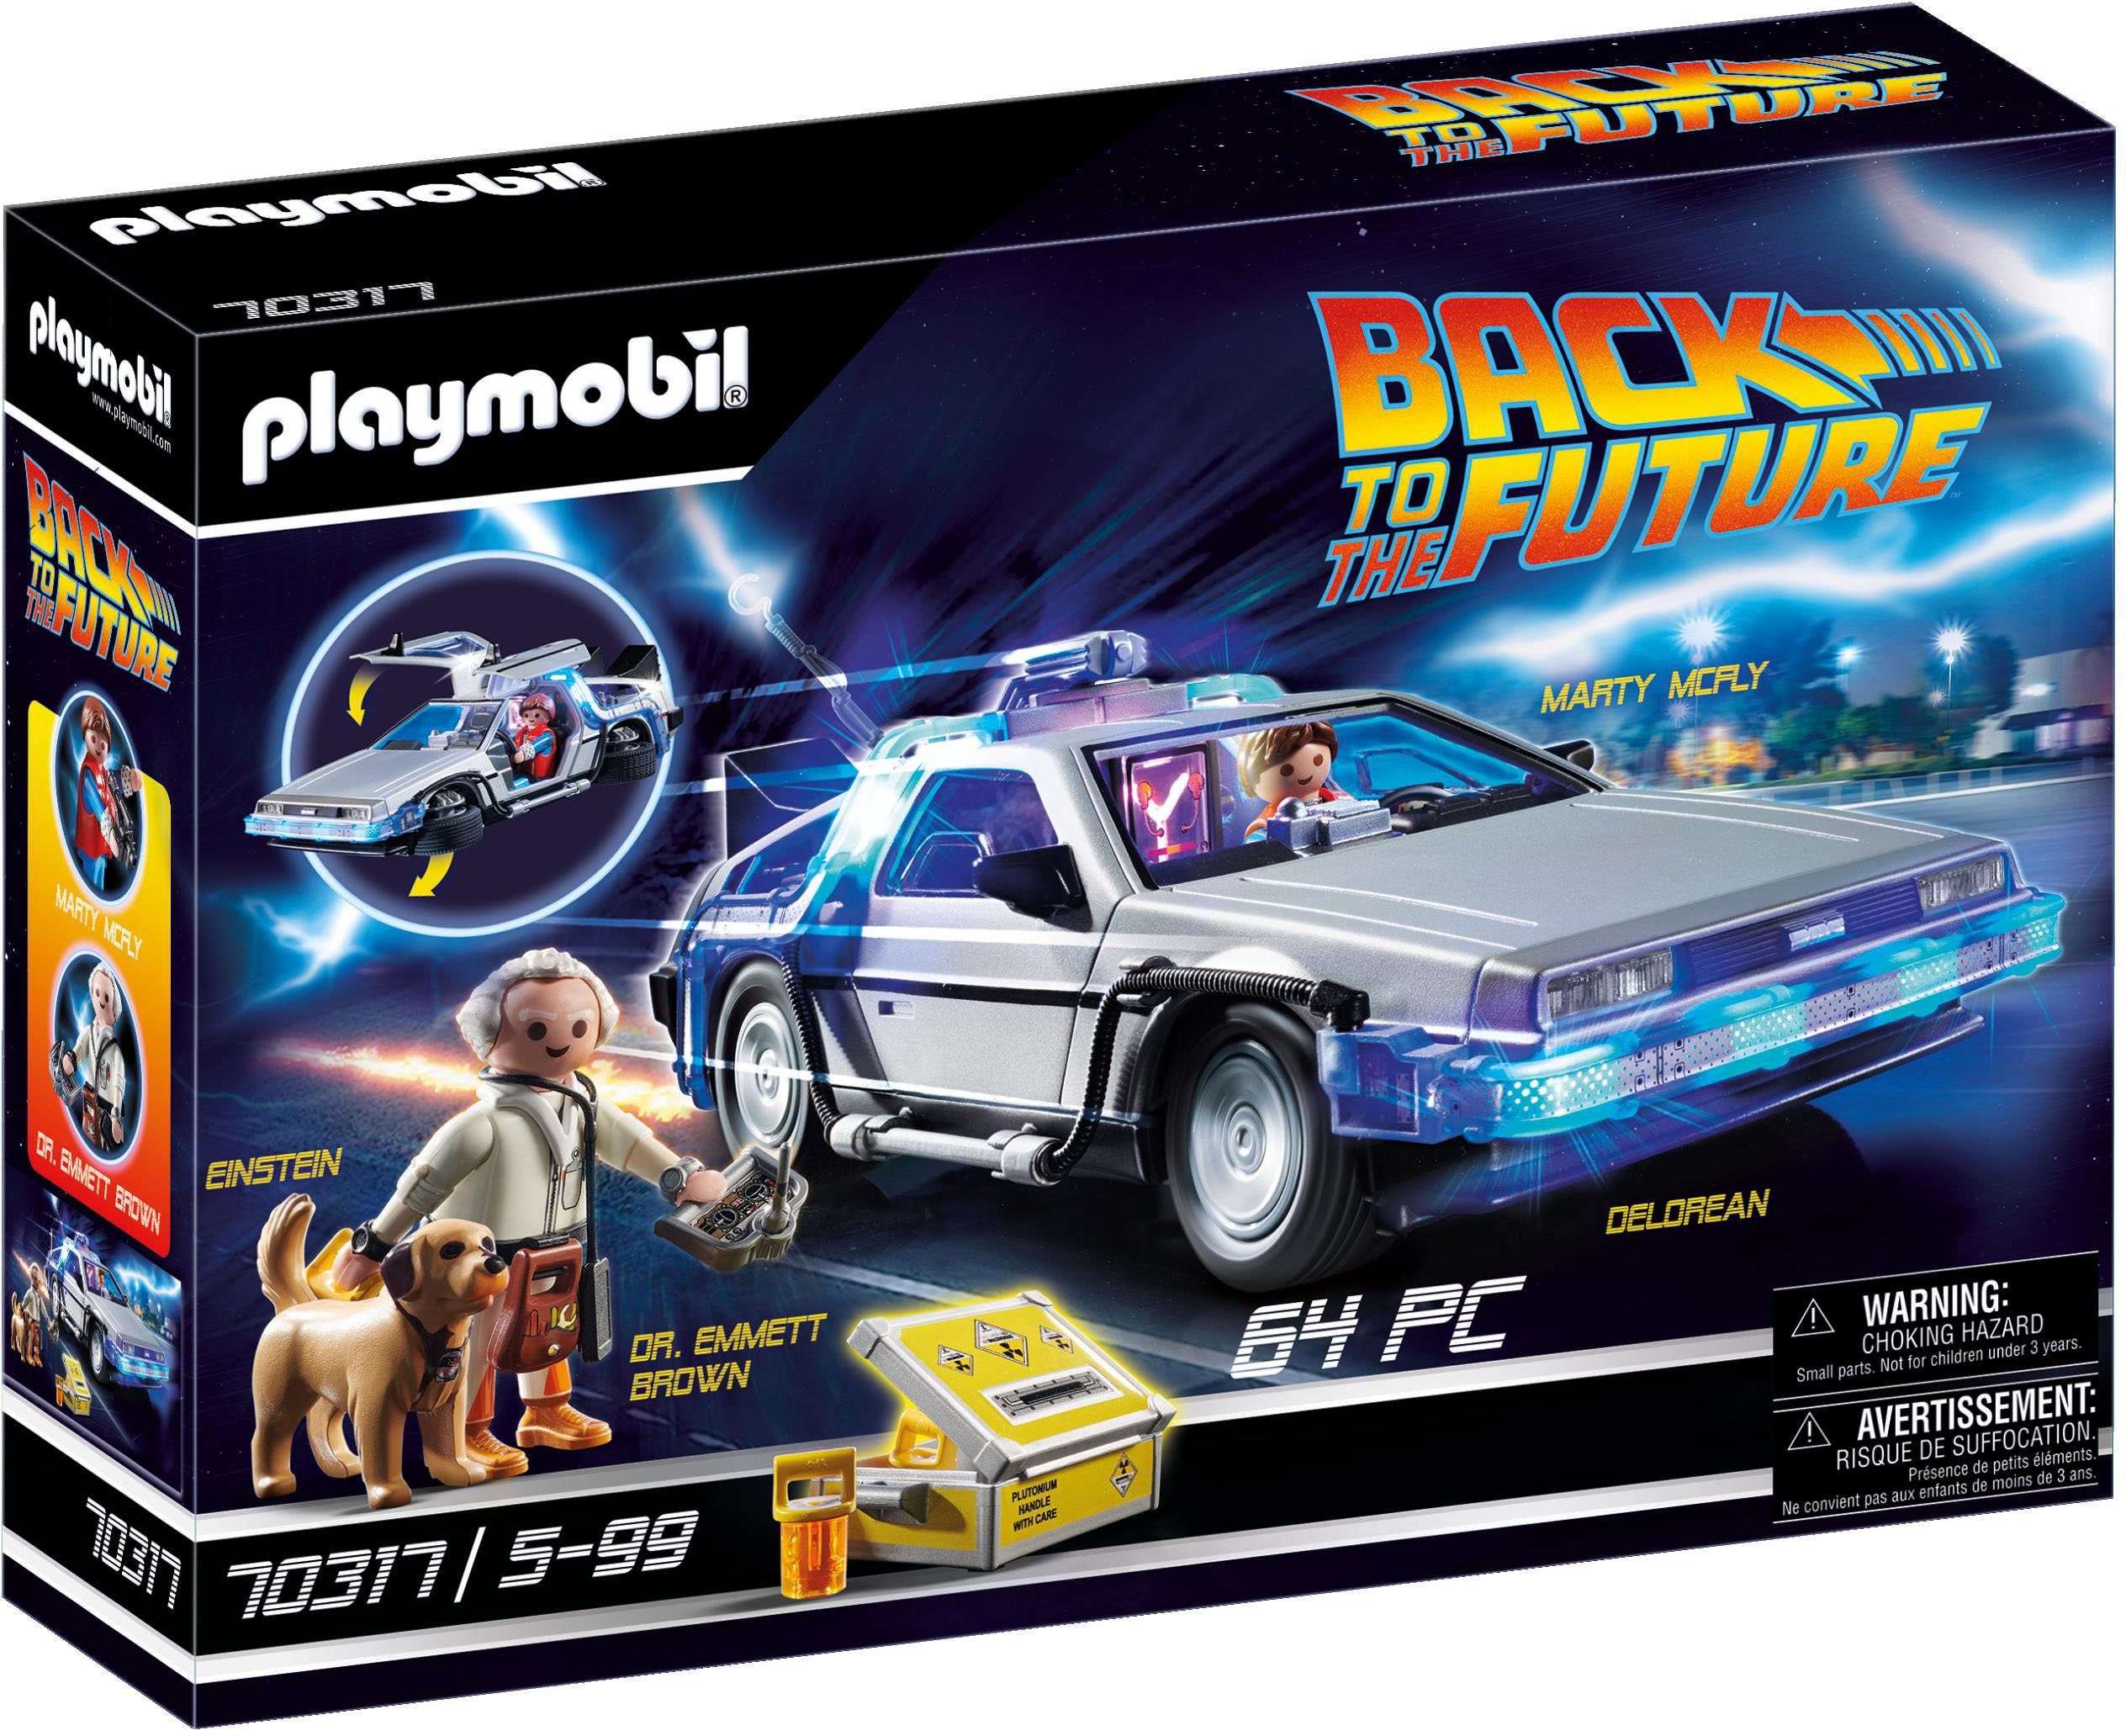 Playmobil® Konstruktions-Spielset Back to the Future DeLorean (70317), Back to the Future, (64 St), Made in Germany